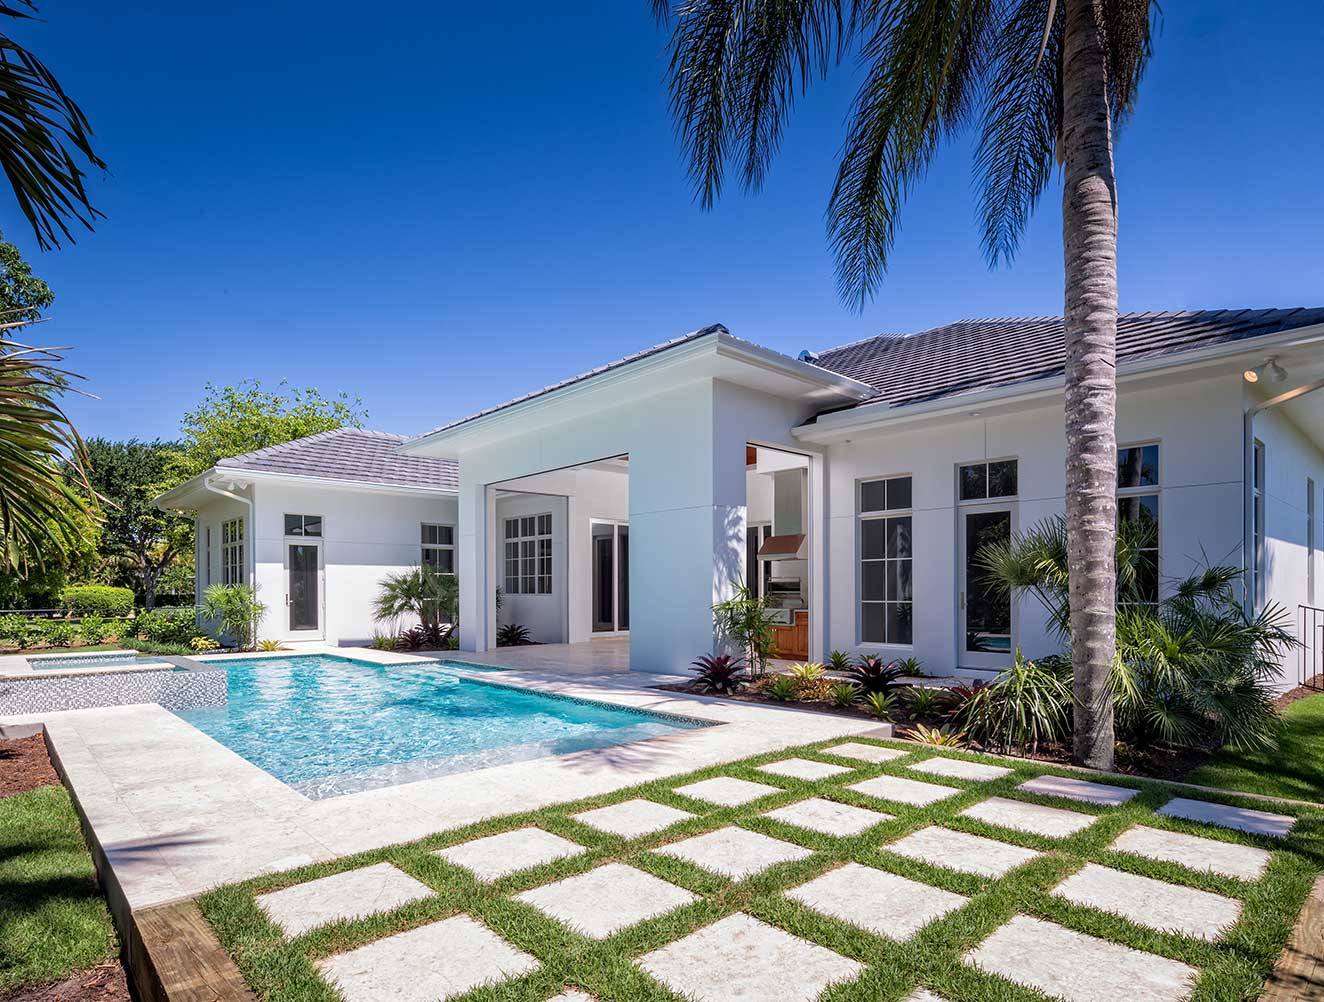 Backyard oasis of traditional Florida style Naples custom home with pool and decorative stone pavers